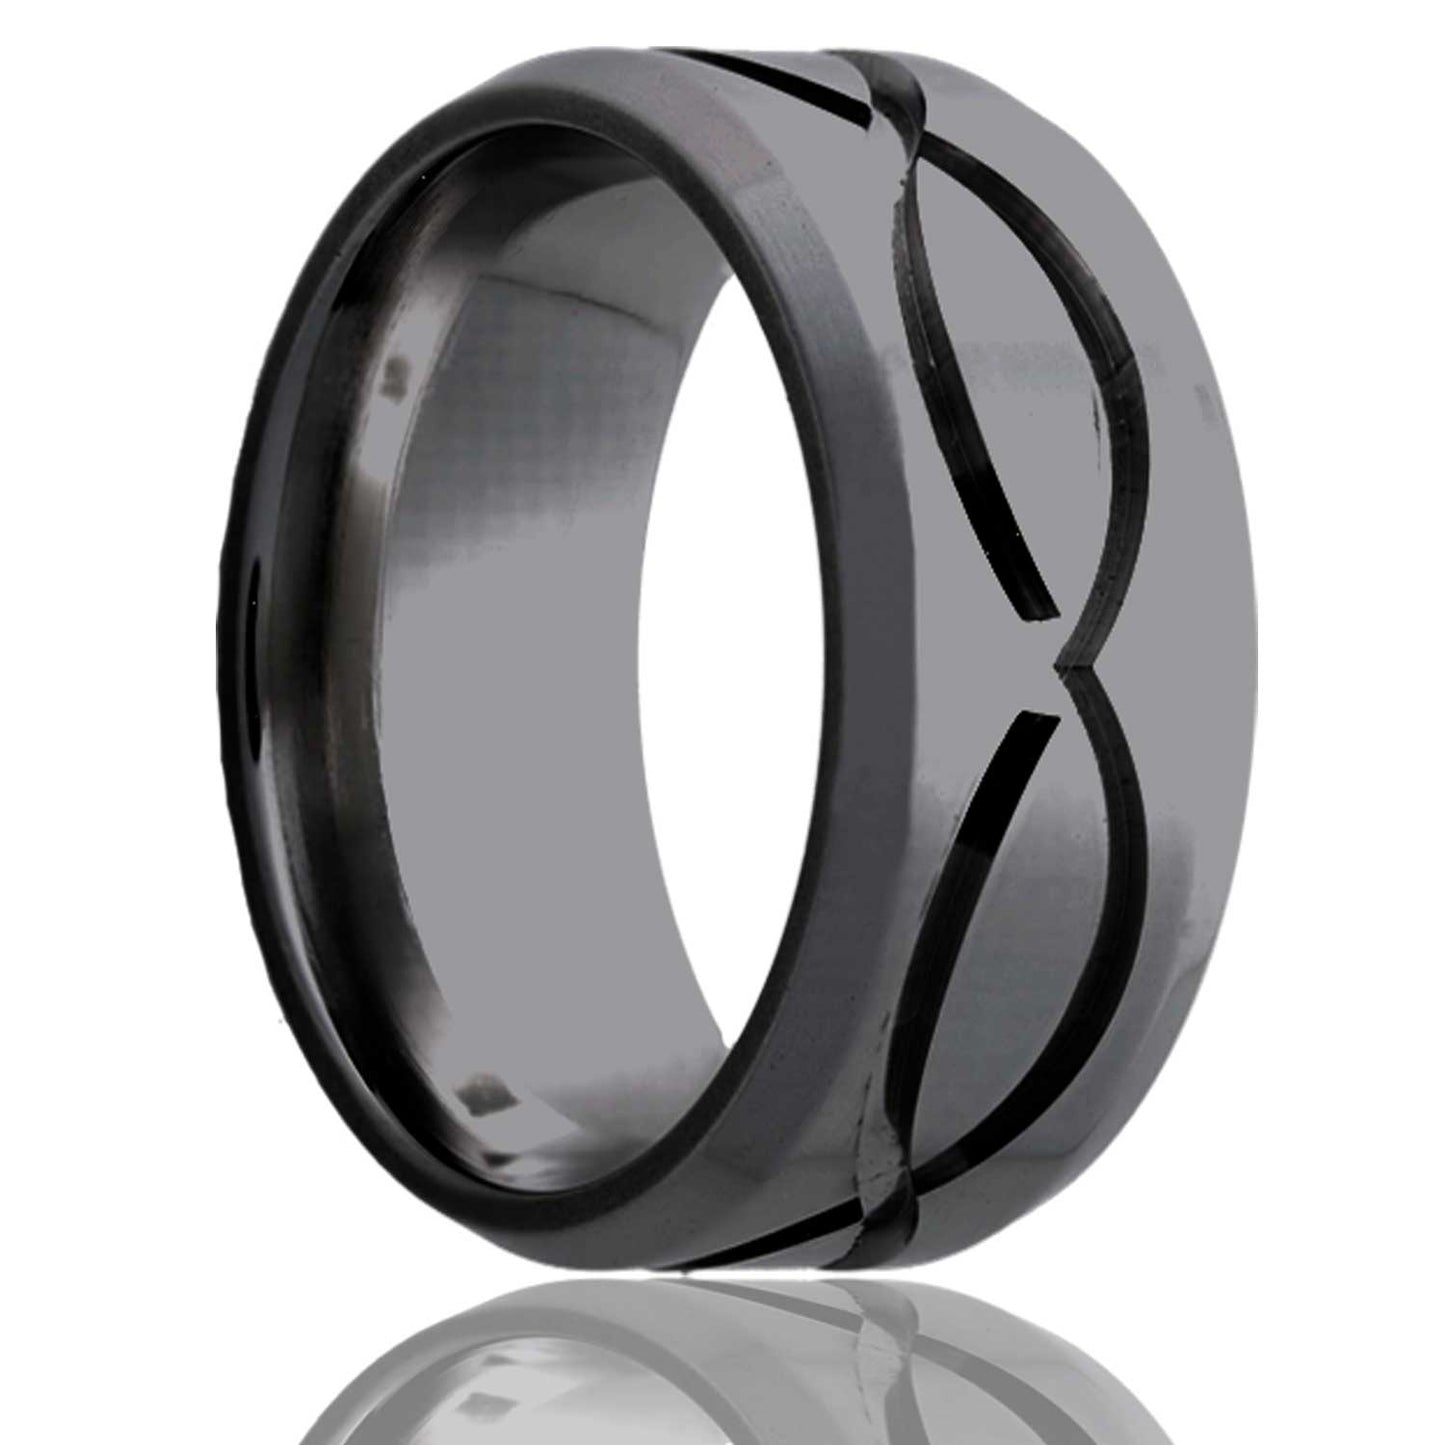 A infinity waves zirconium men's wedding band with beveled edges displayed on a neutral white background.